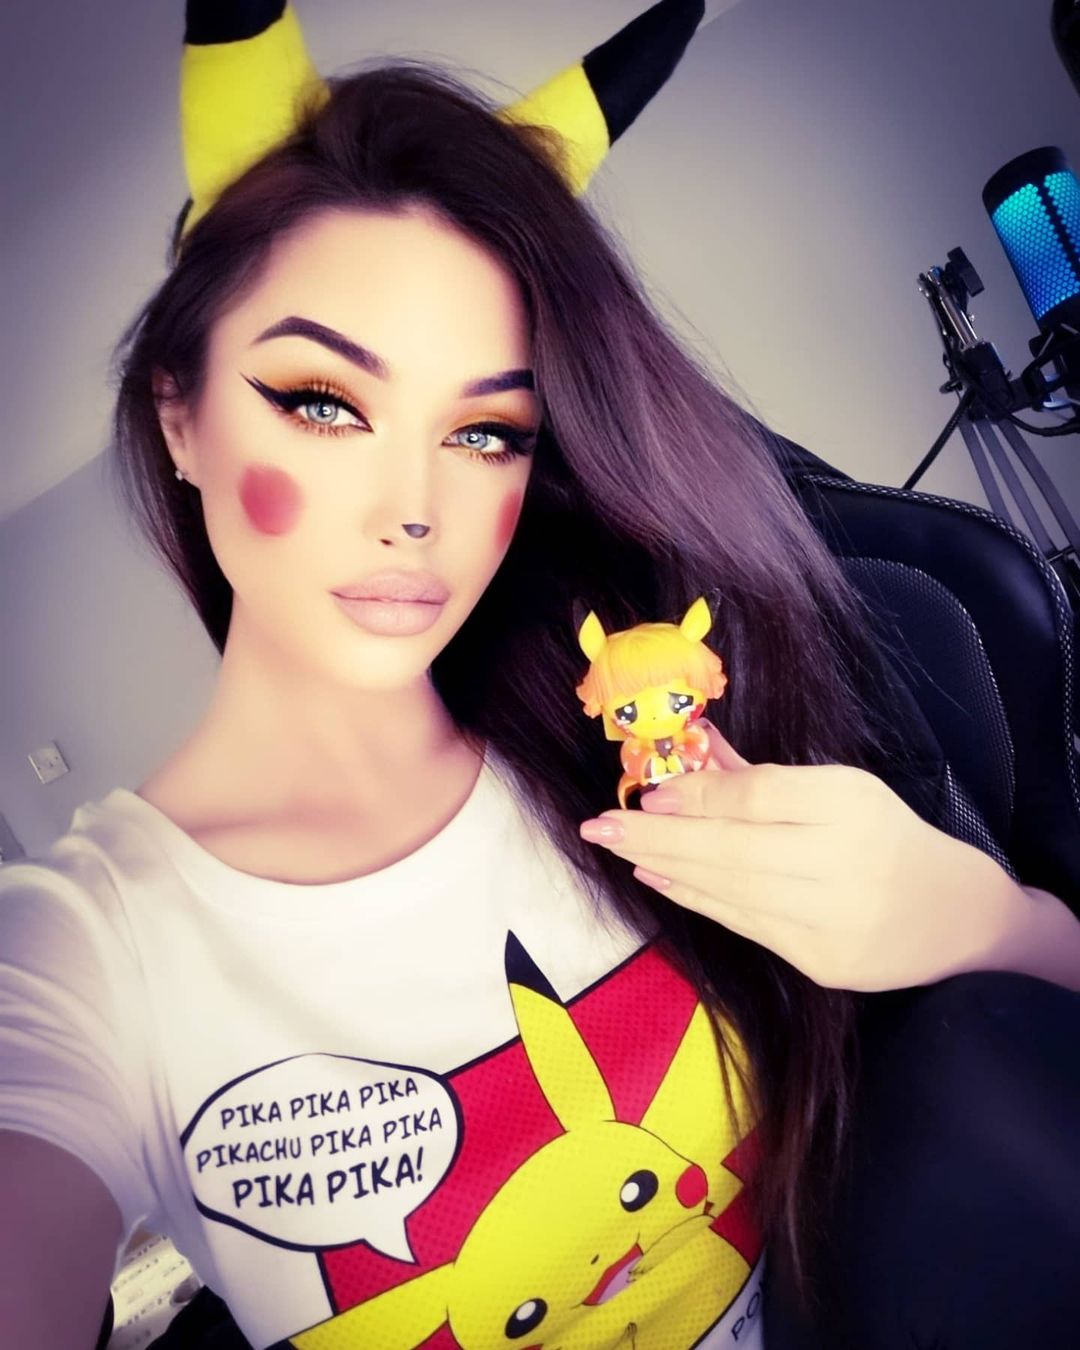 PIKACHU COSPLAY DEMON SLAYER PIKACHU
Just for fun!! .
Official Affiliate & mo 1